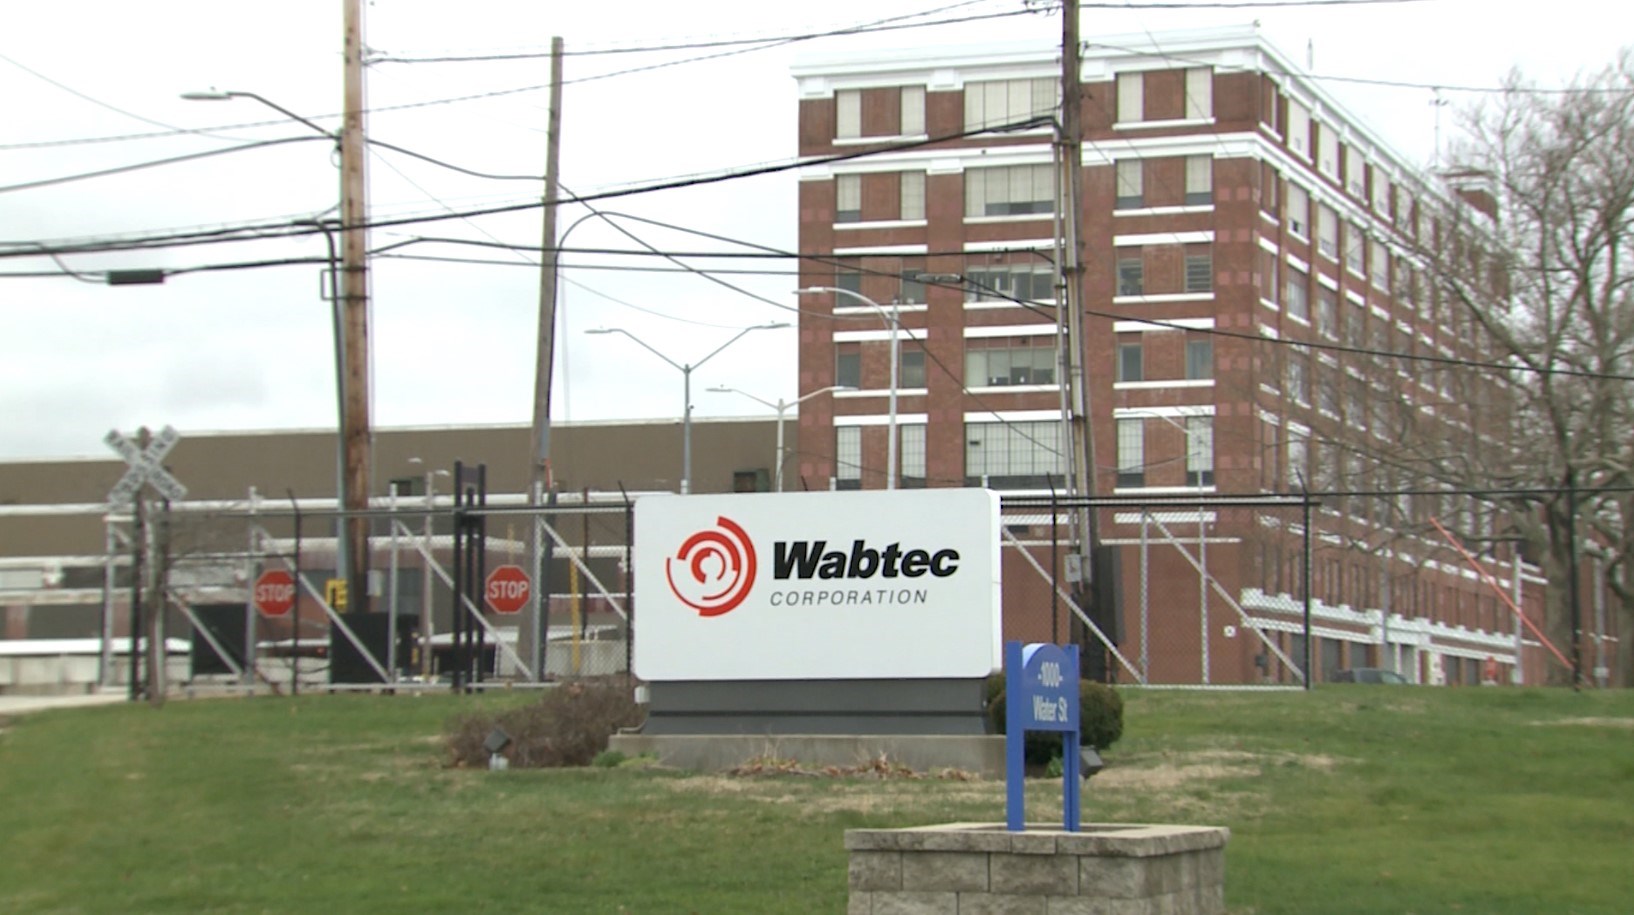 Union Contract Talks to Resume at Wabtec